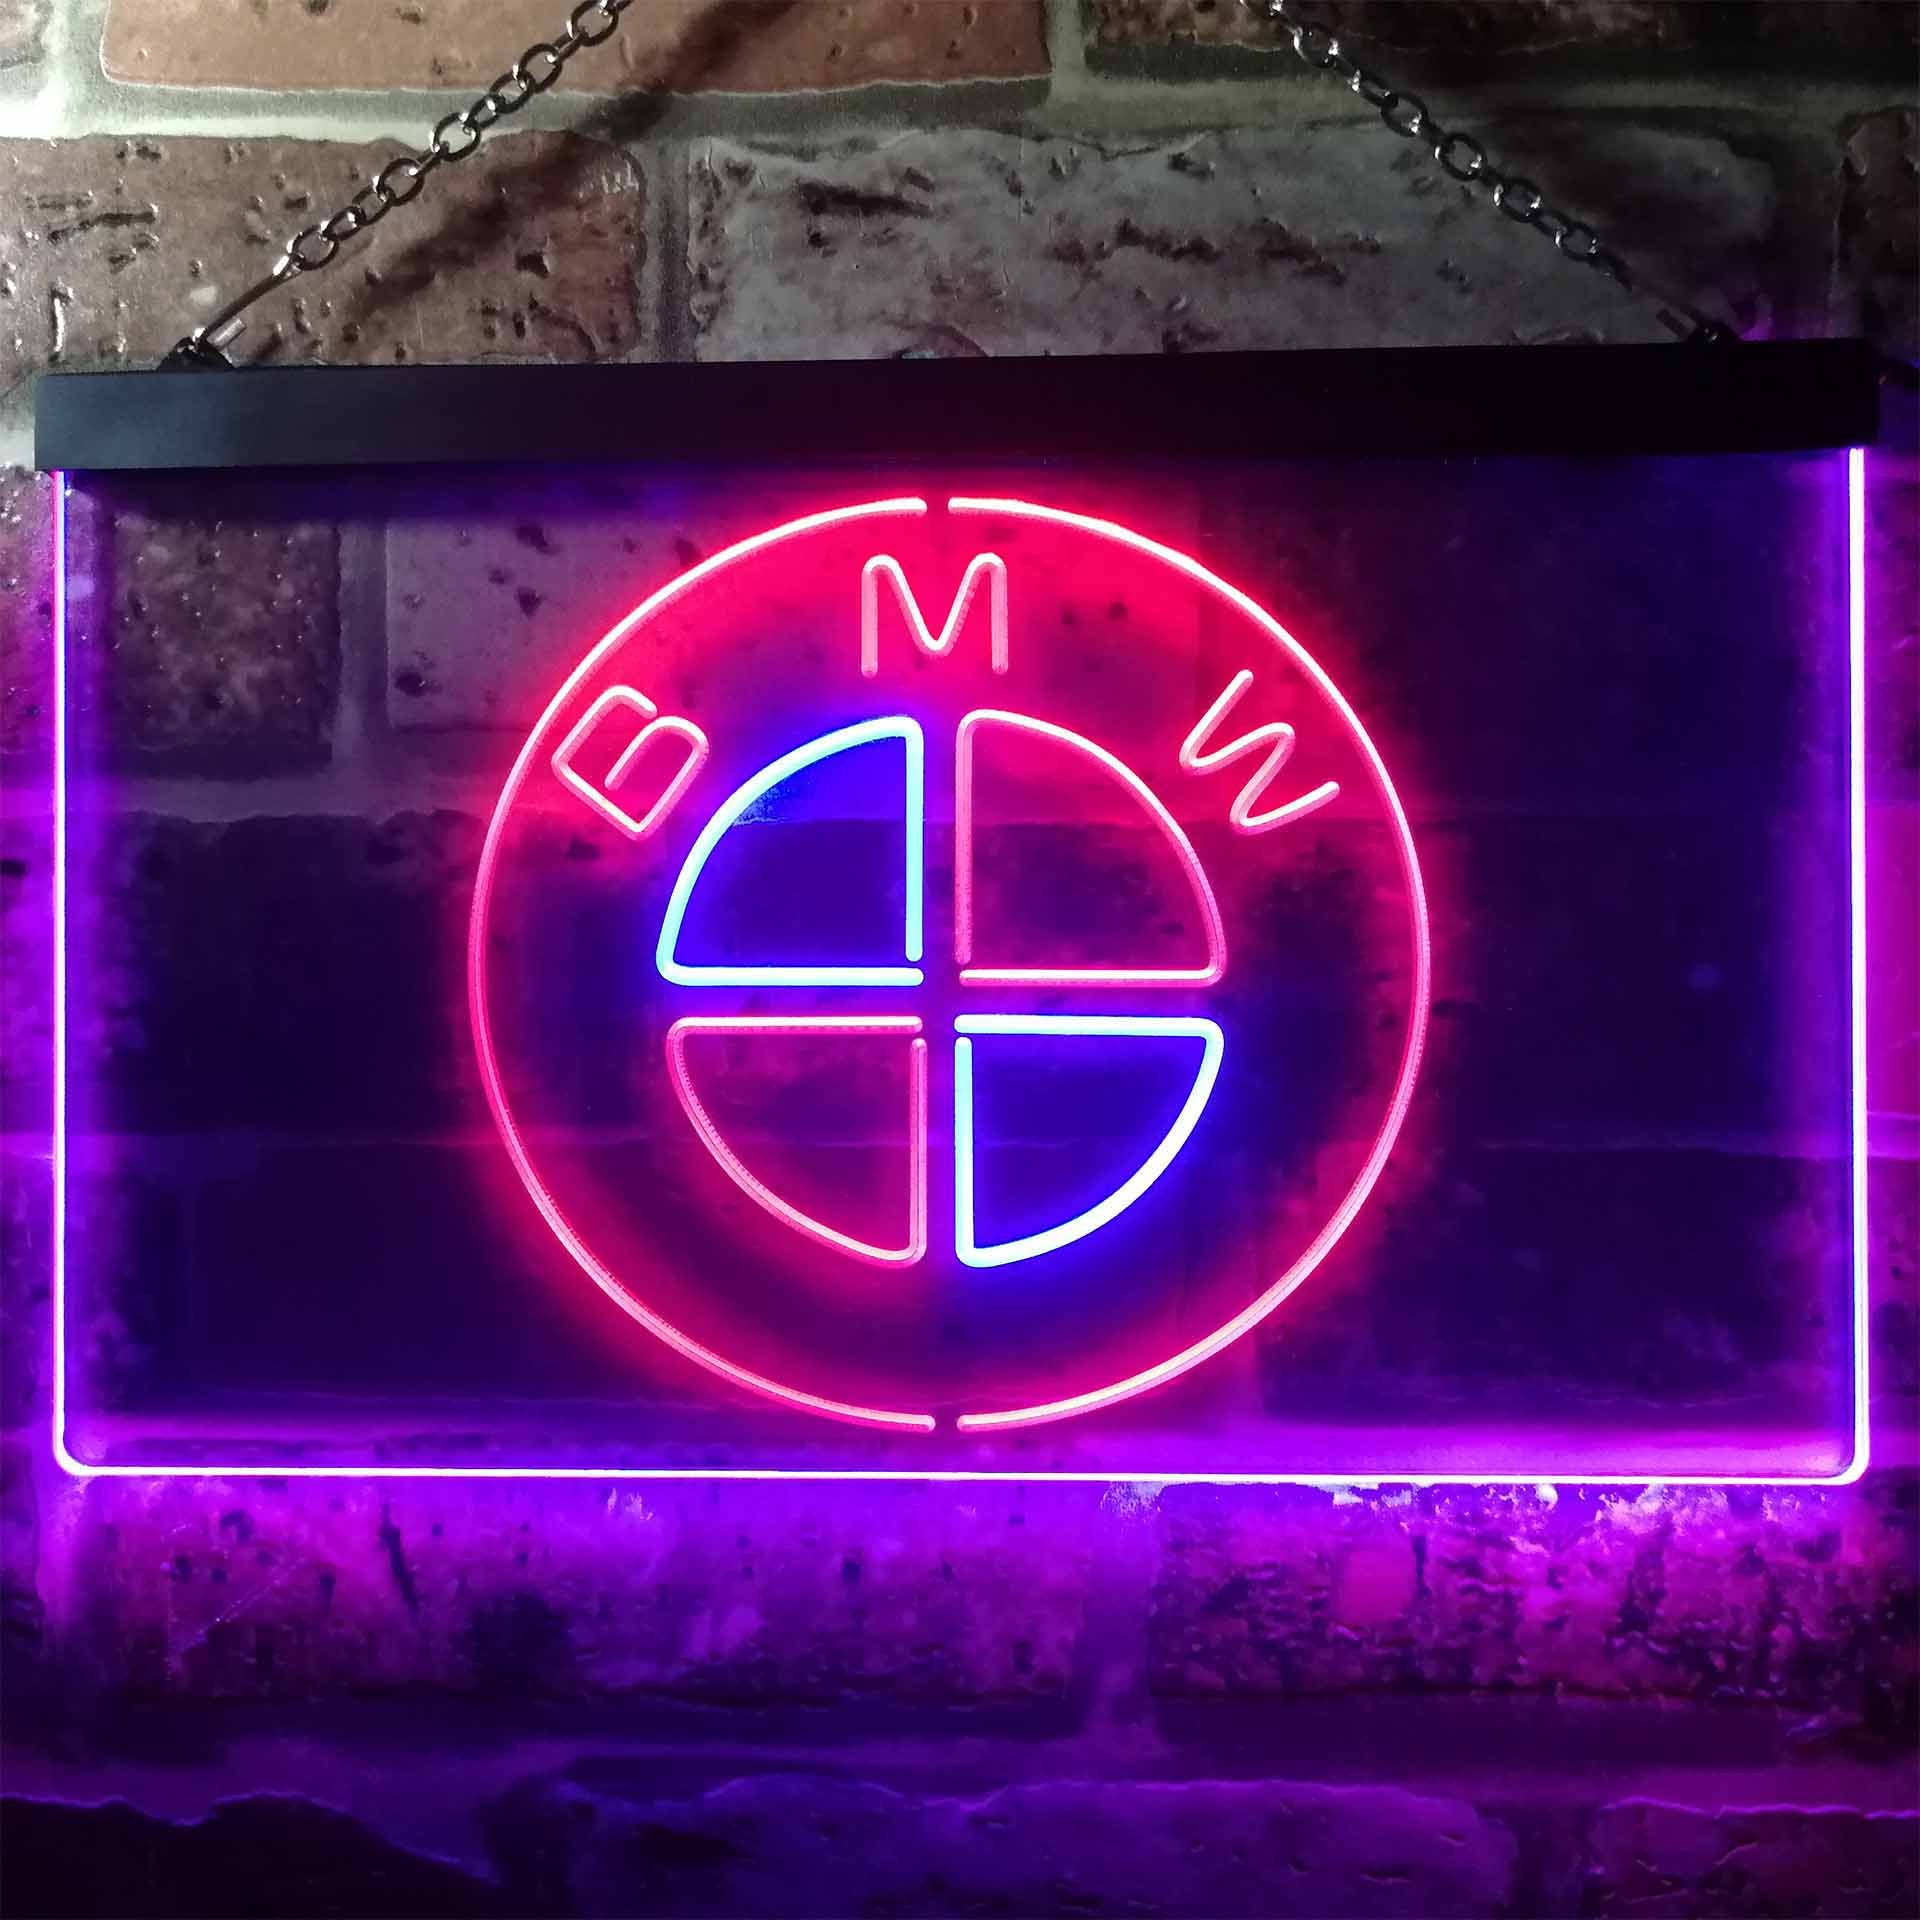 Bmw light wall sign, Bmw logo sign, Bmw led sign, Bmw neon sign, Bmw light  sign, Garage led wall decor, Garage sign with lights -  Canada